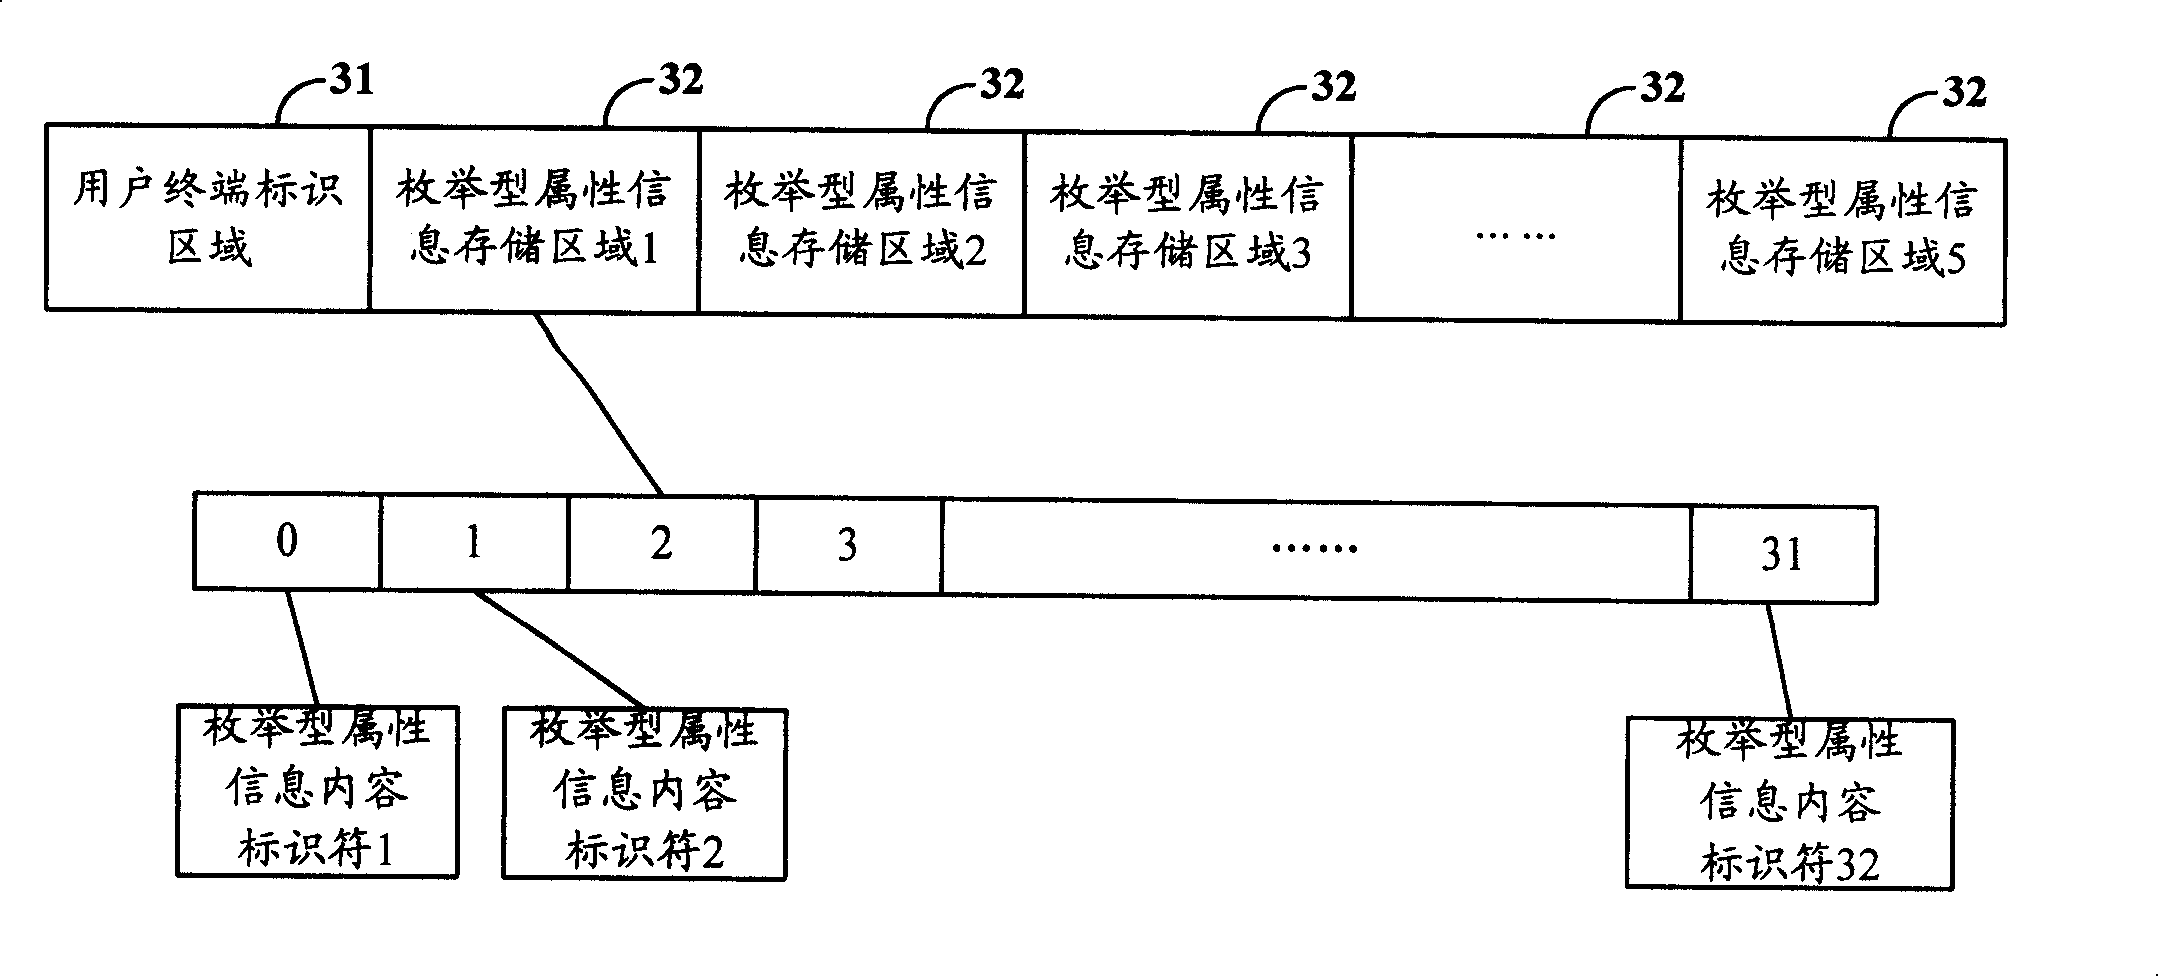 Method and system for obtaining attribute information content